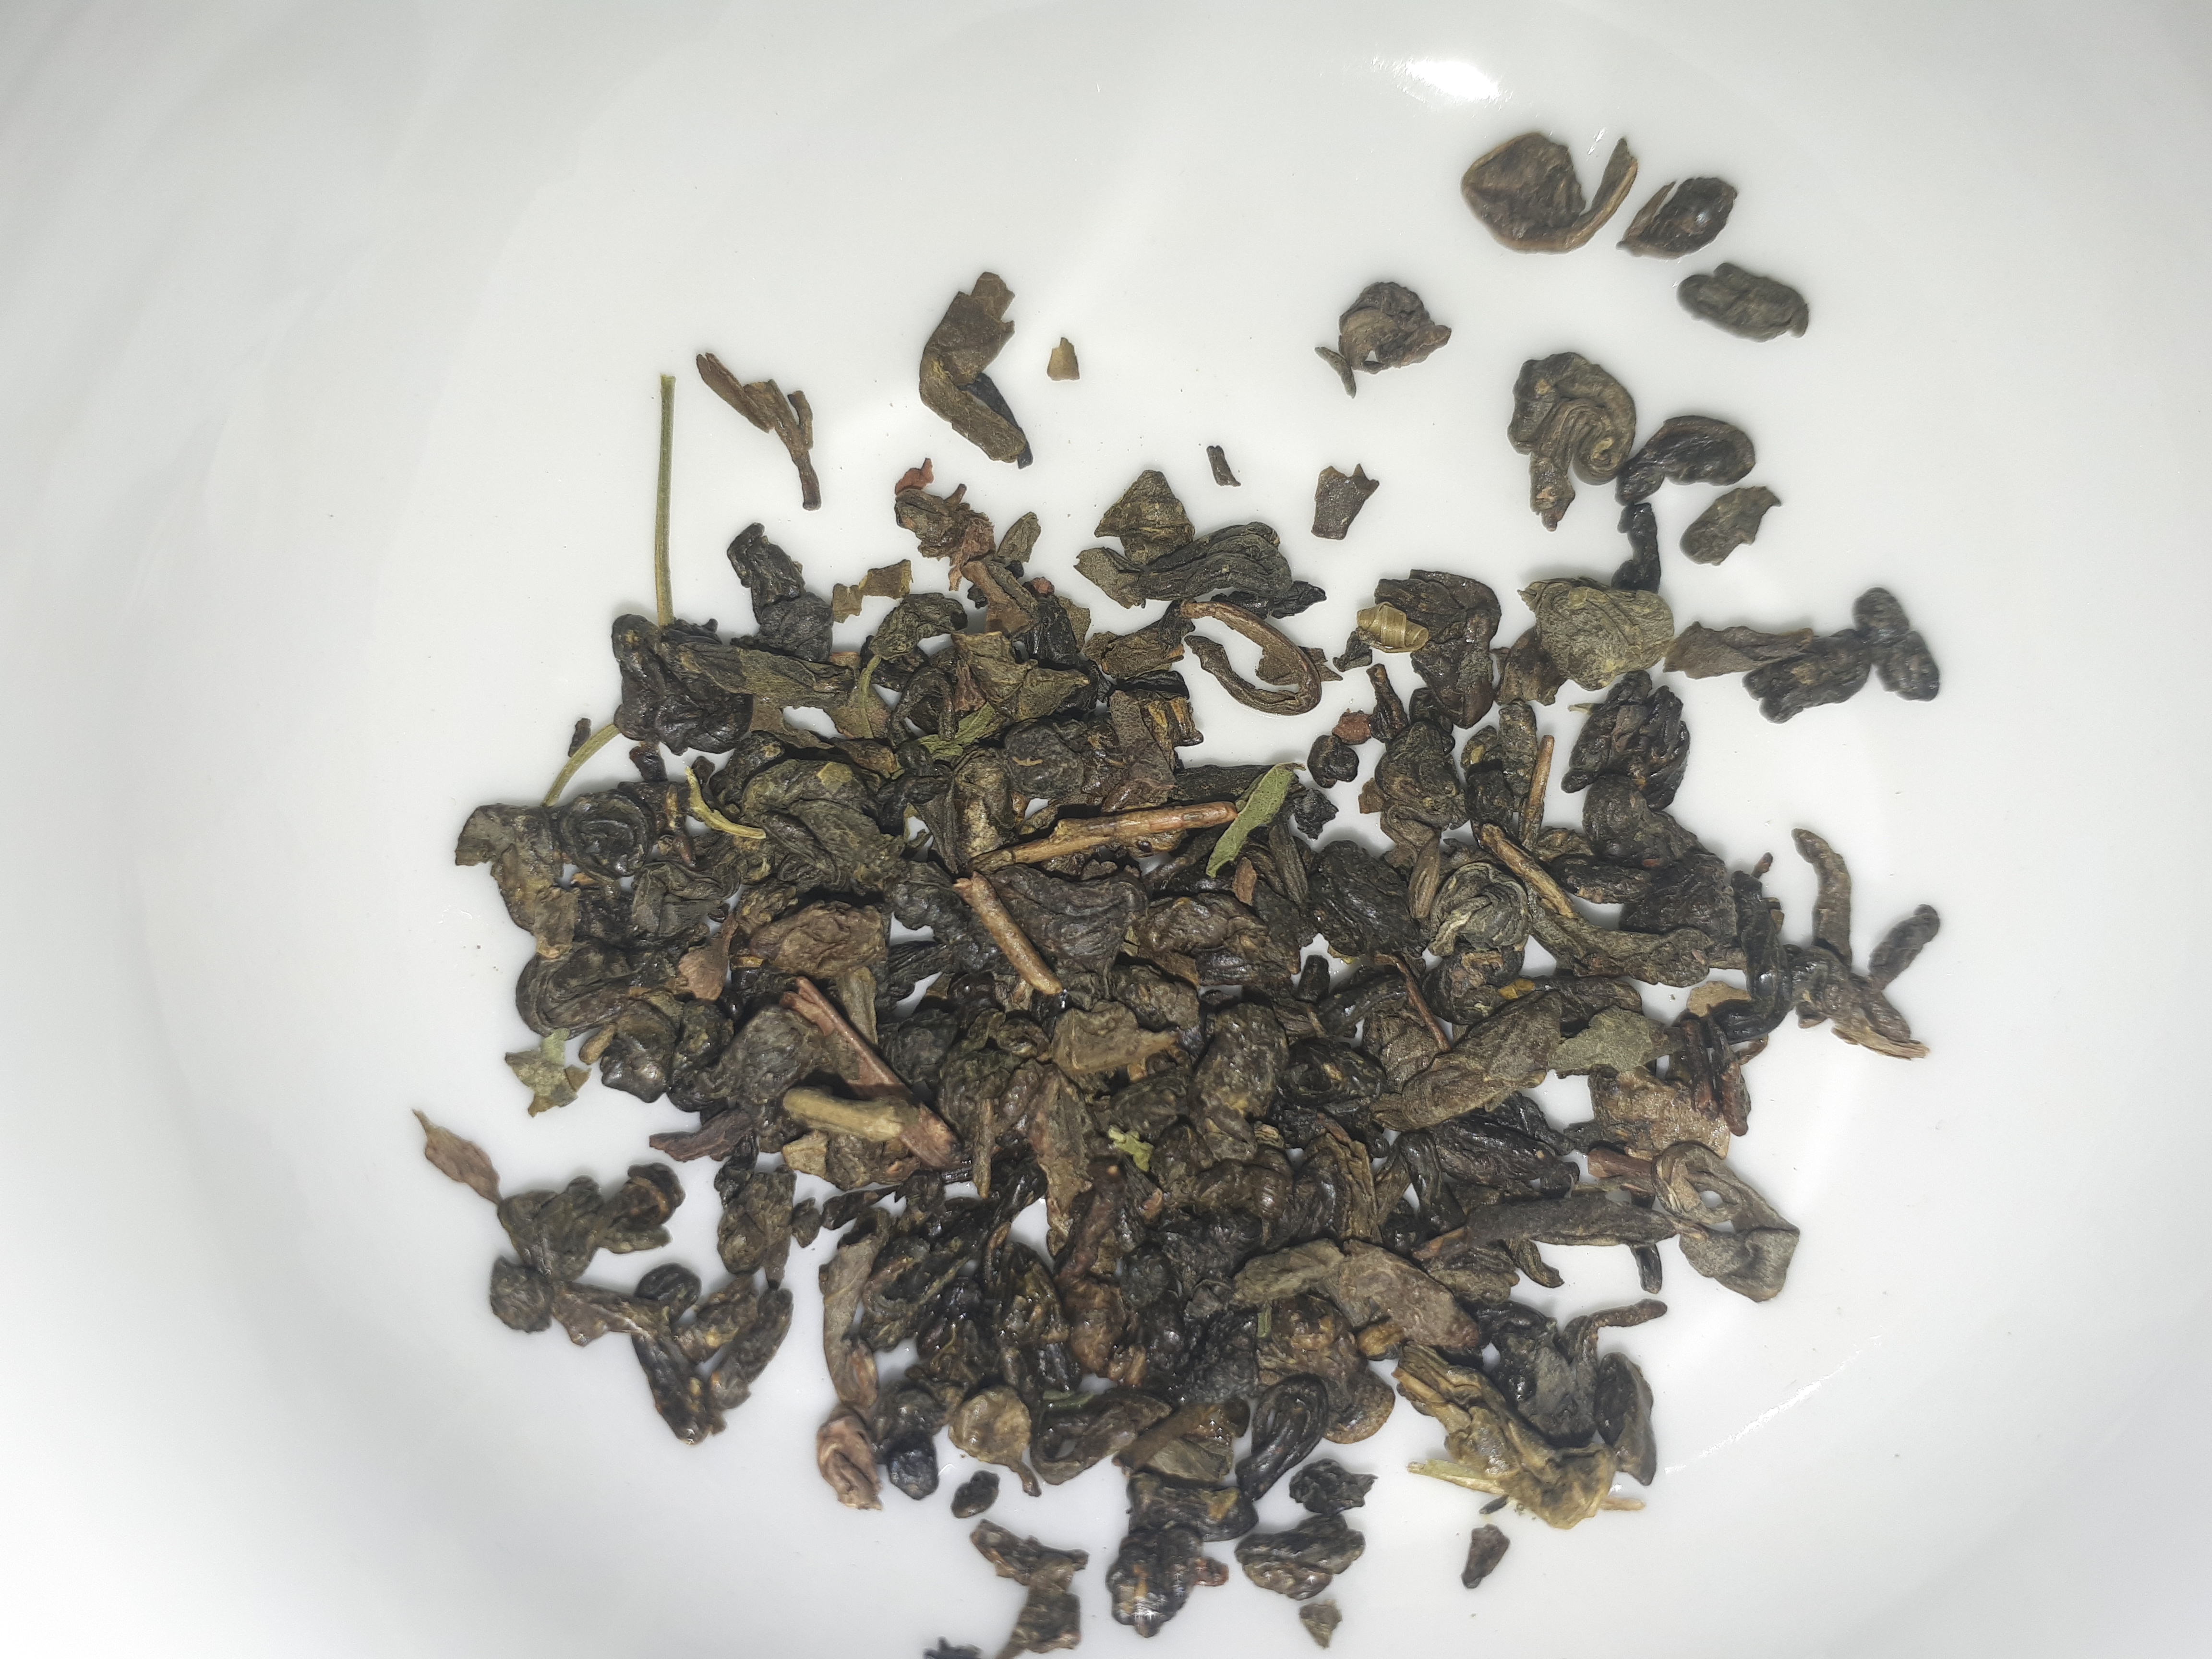 Leaves from the blend.